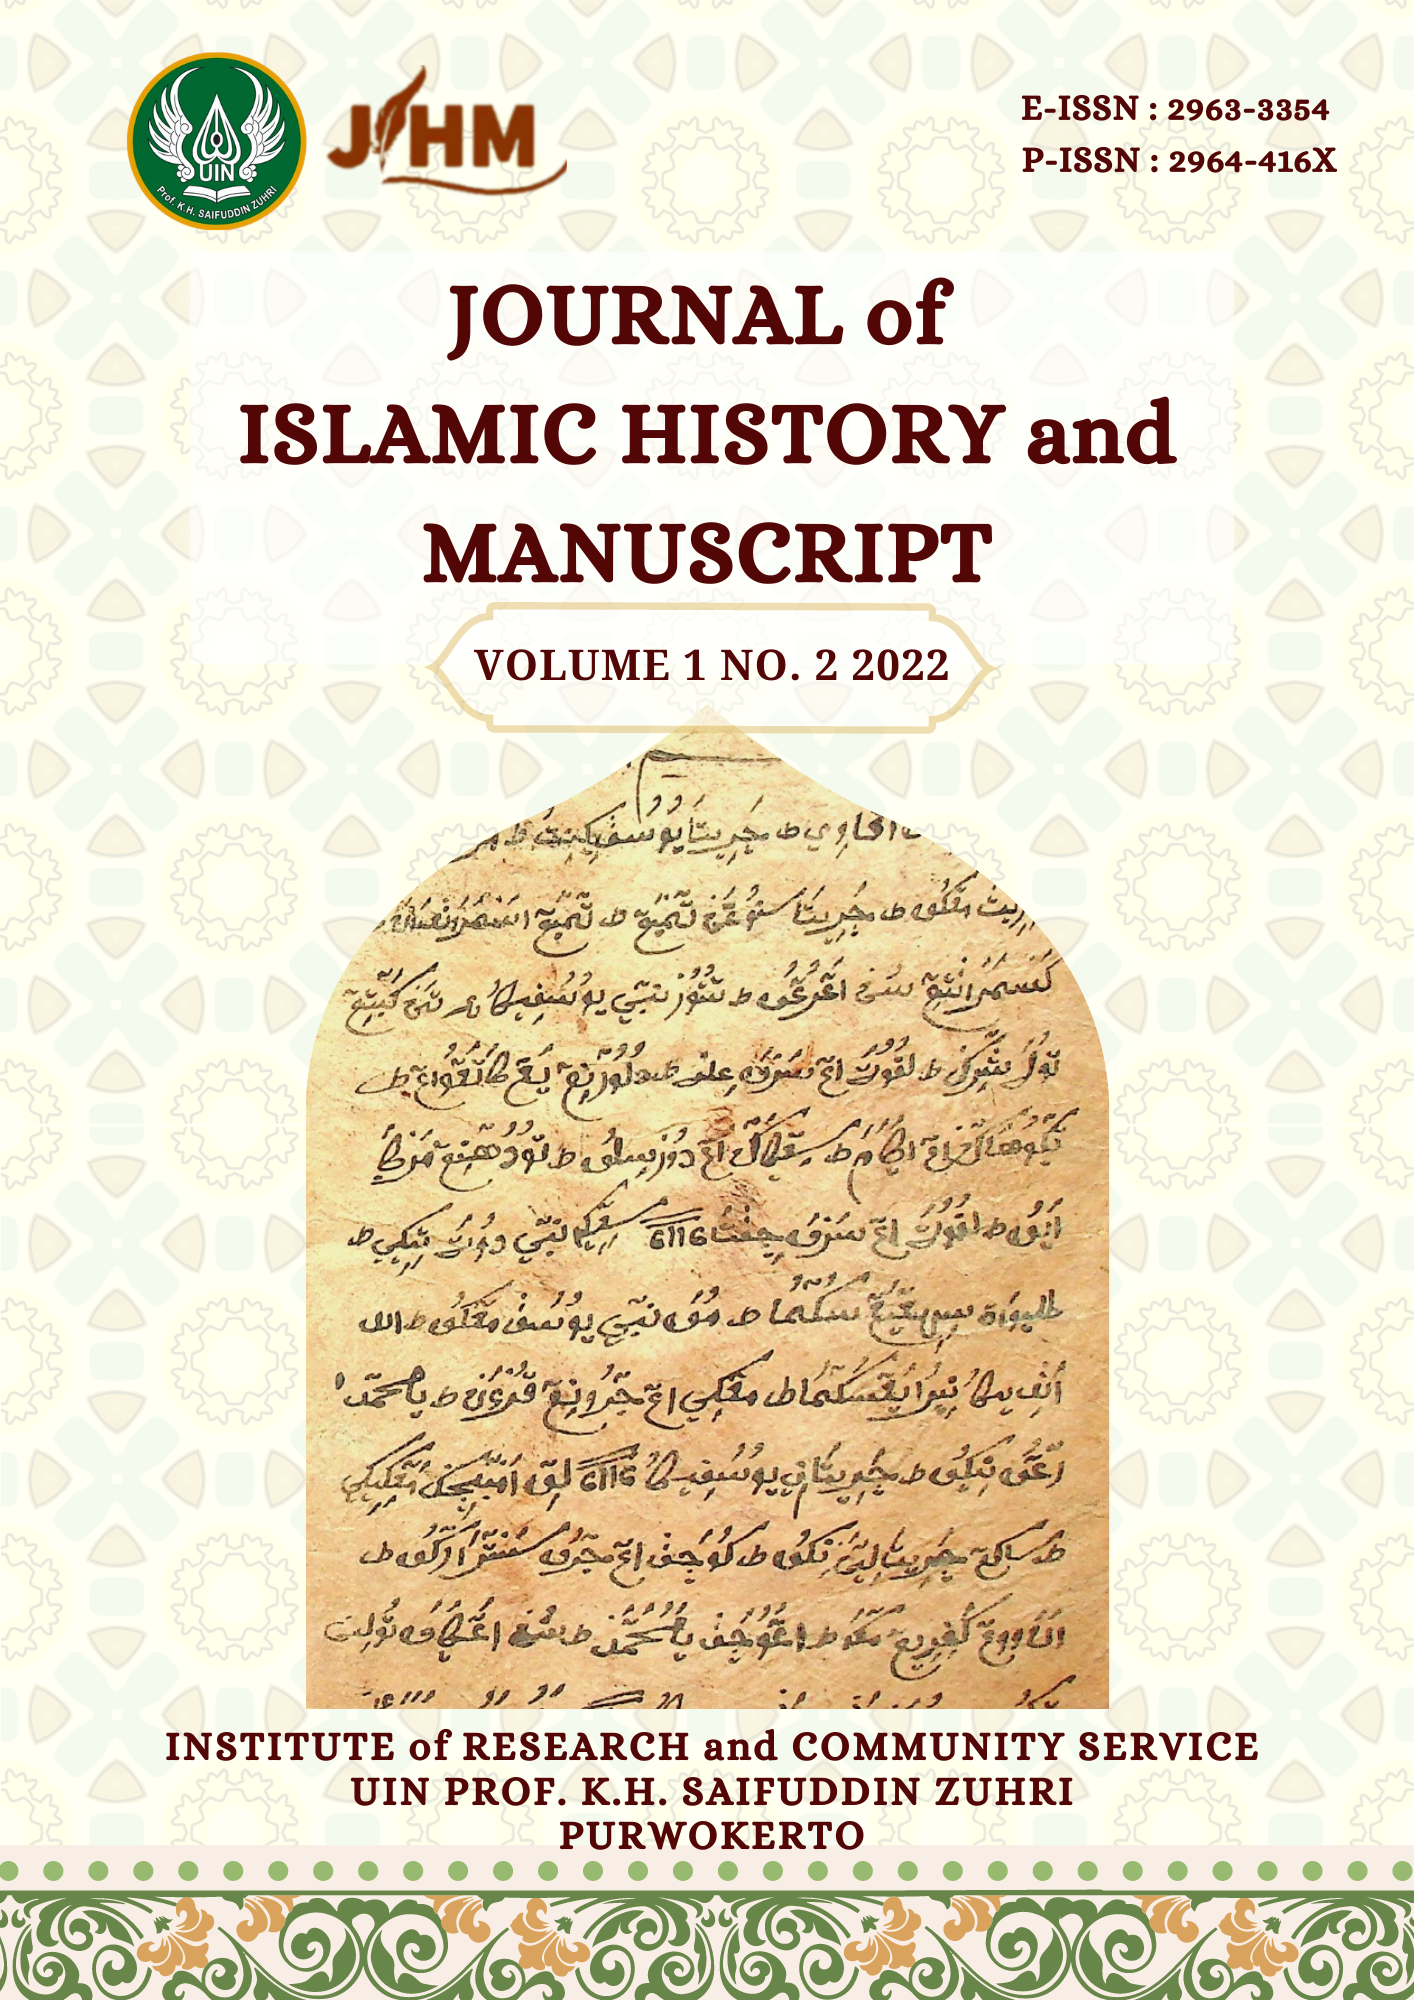 					View Vol. 1 No. 2 (2022): Journal of Islamic History and Manuscript
				